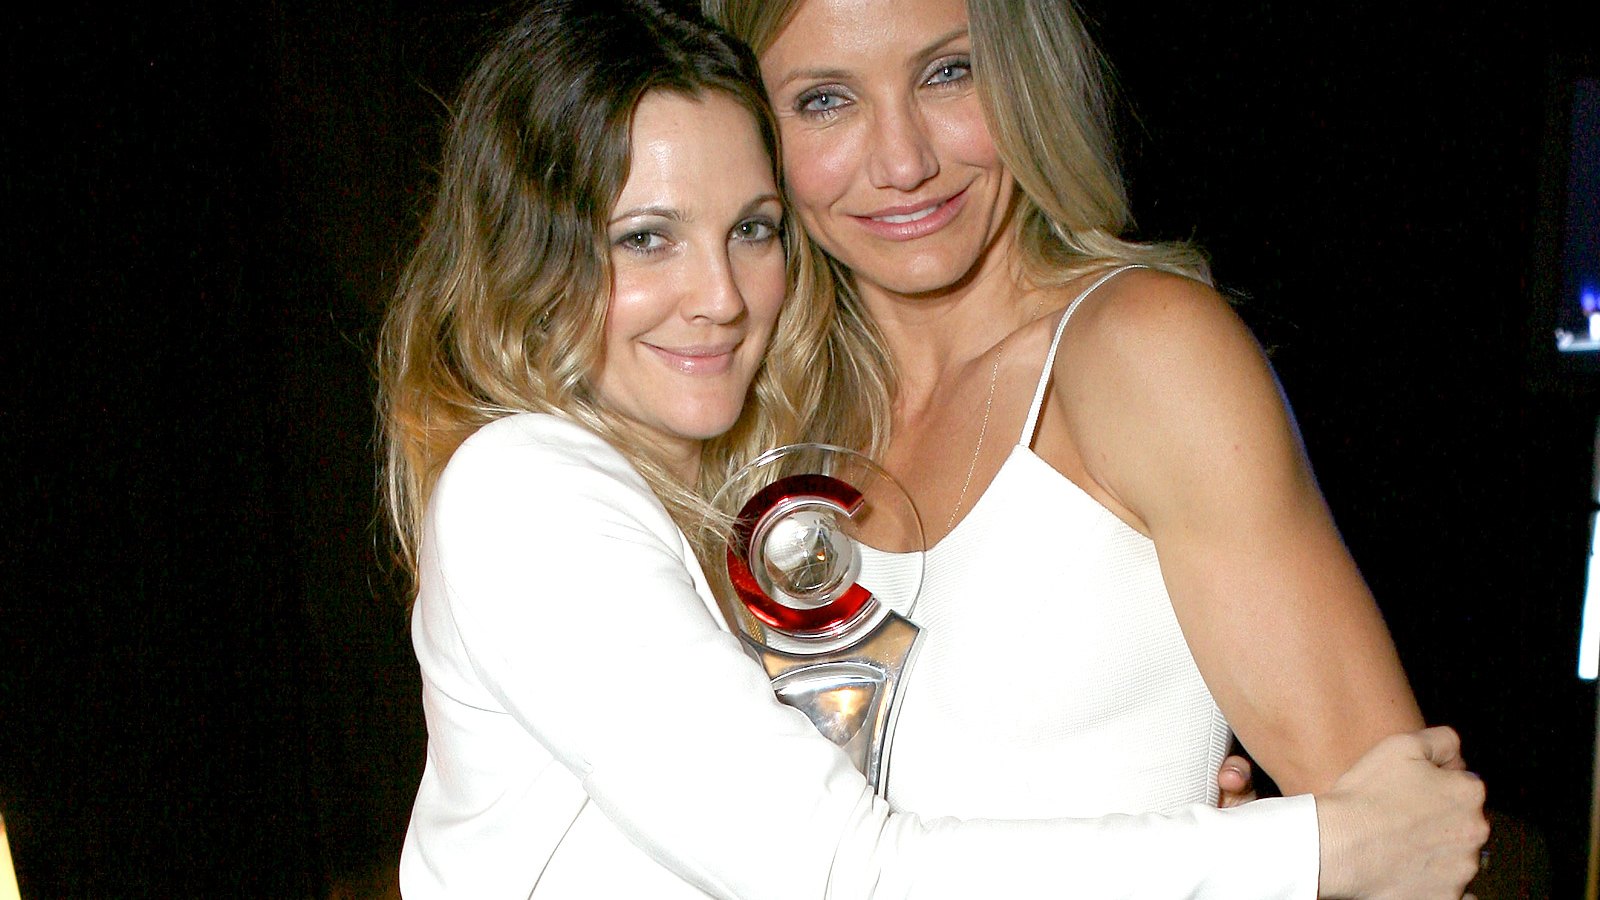 Drew Barrymore and Cameron Diaz during CinemaCon